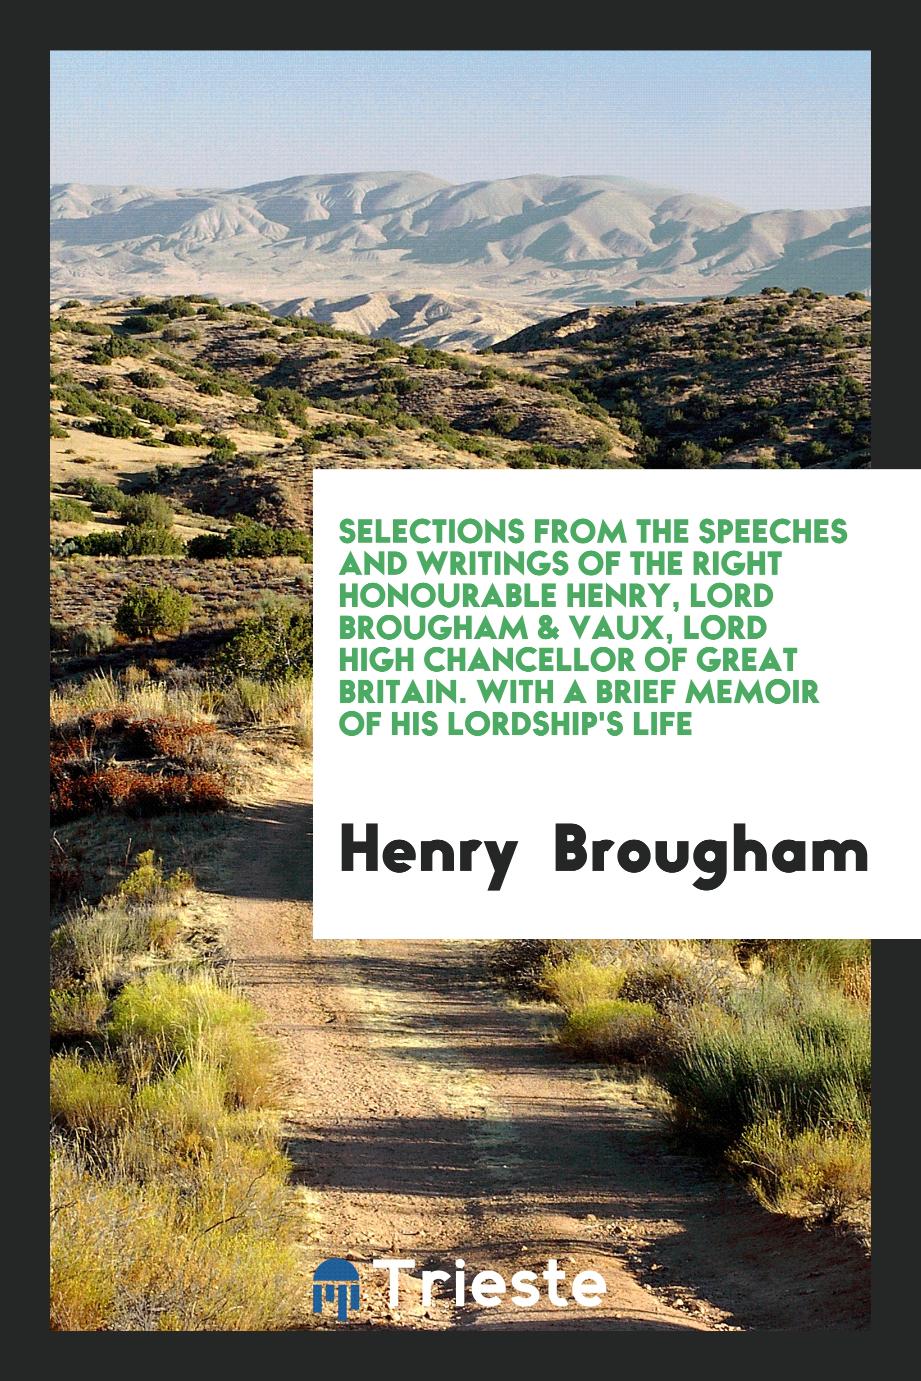 Selections from the Speeches and Writings of the Right Honourable Henry, Lord Brougham & Vaux, Lord High Chancellor of Great Britain. With a Brief Memoir of His Lordship's Life